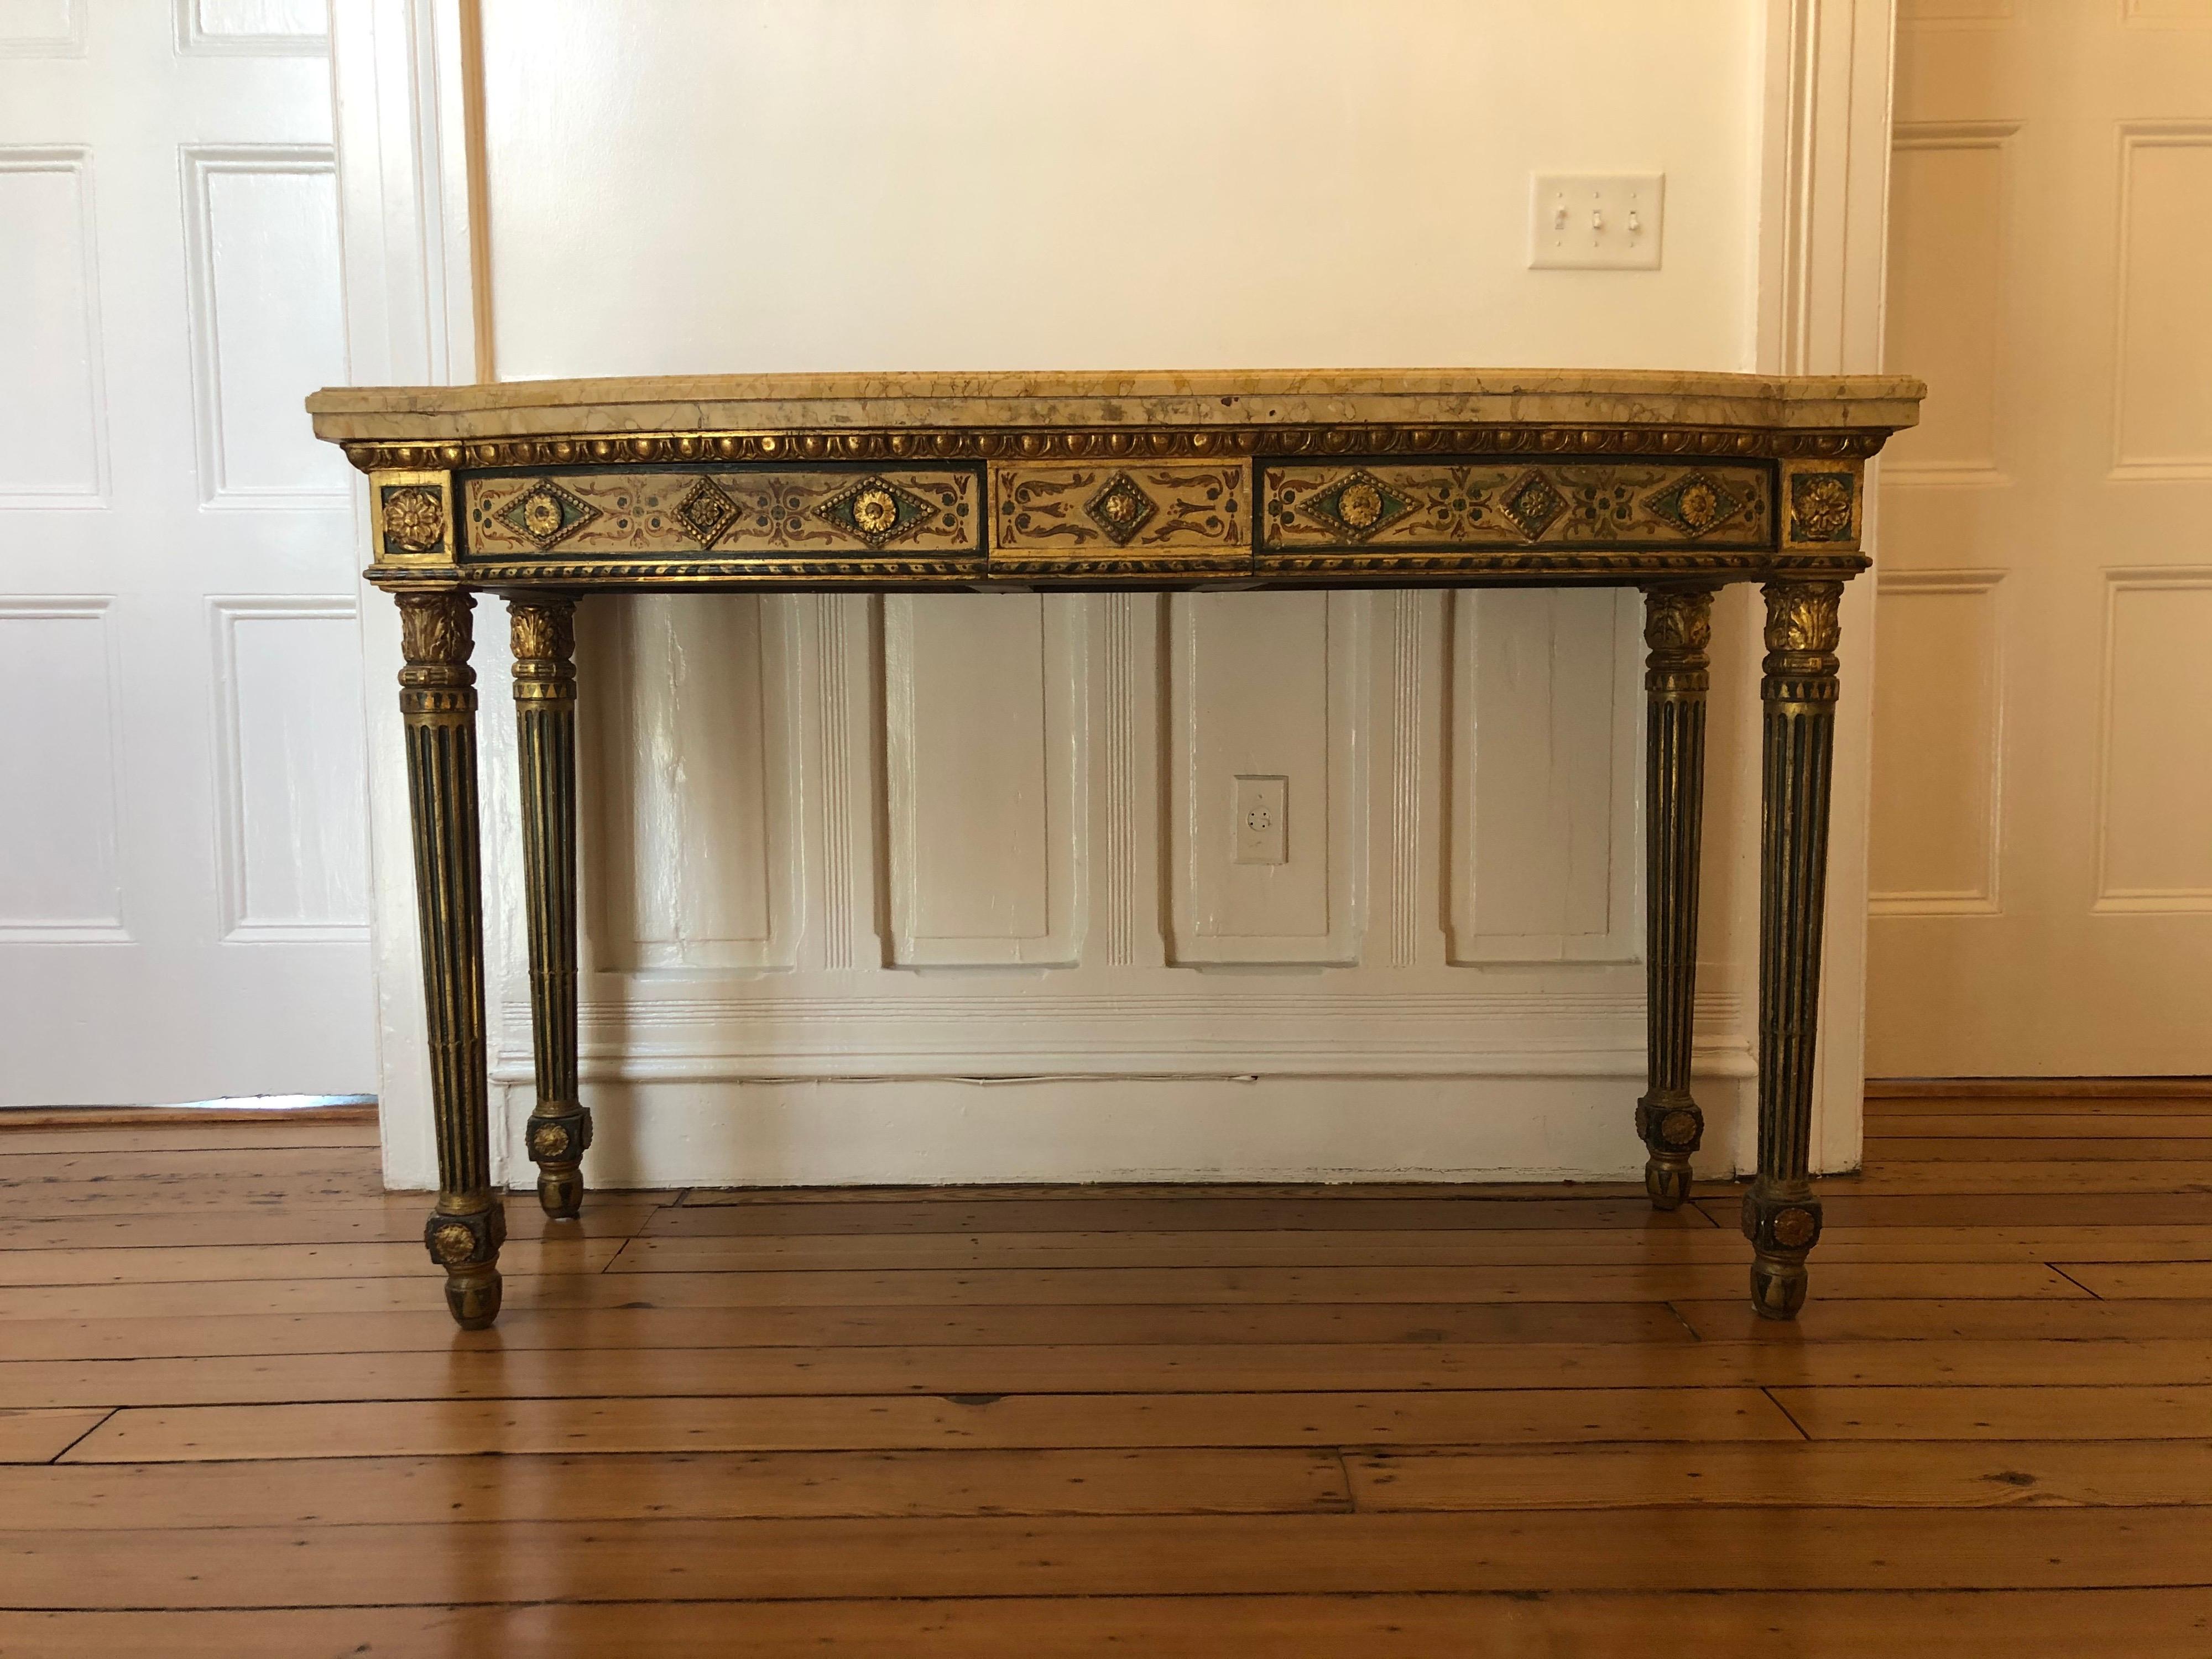 Elegant neoclassical Italian marble top console has a double marble above an Adam Style painted frieze with hidden drawers. The legs are decorated with craved gilt acanthus capitals above fluted legs that are gilt and painted. This console has a